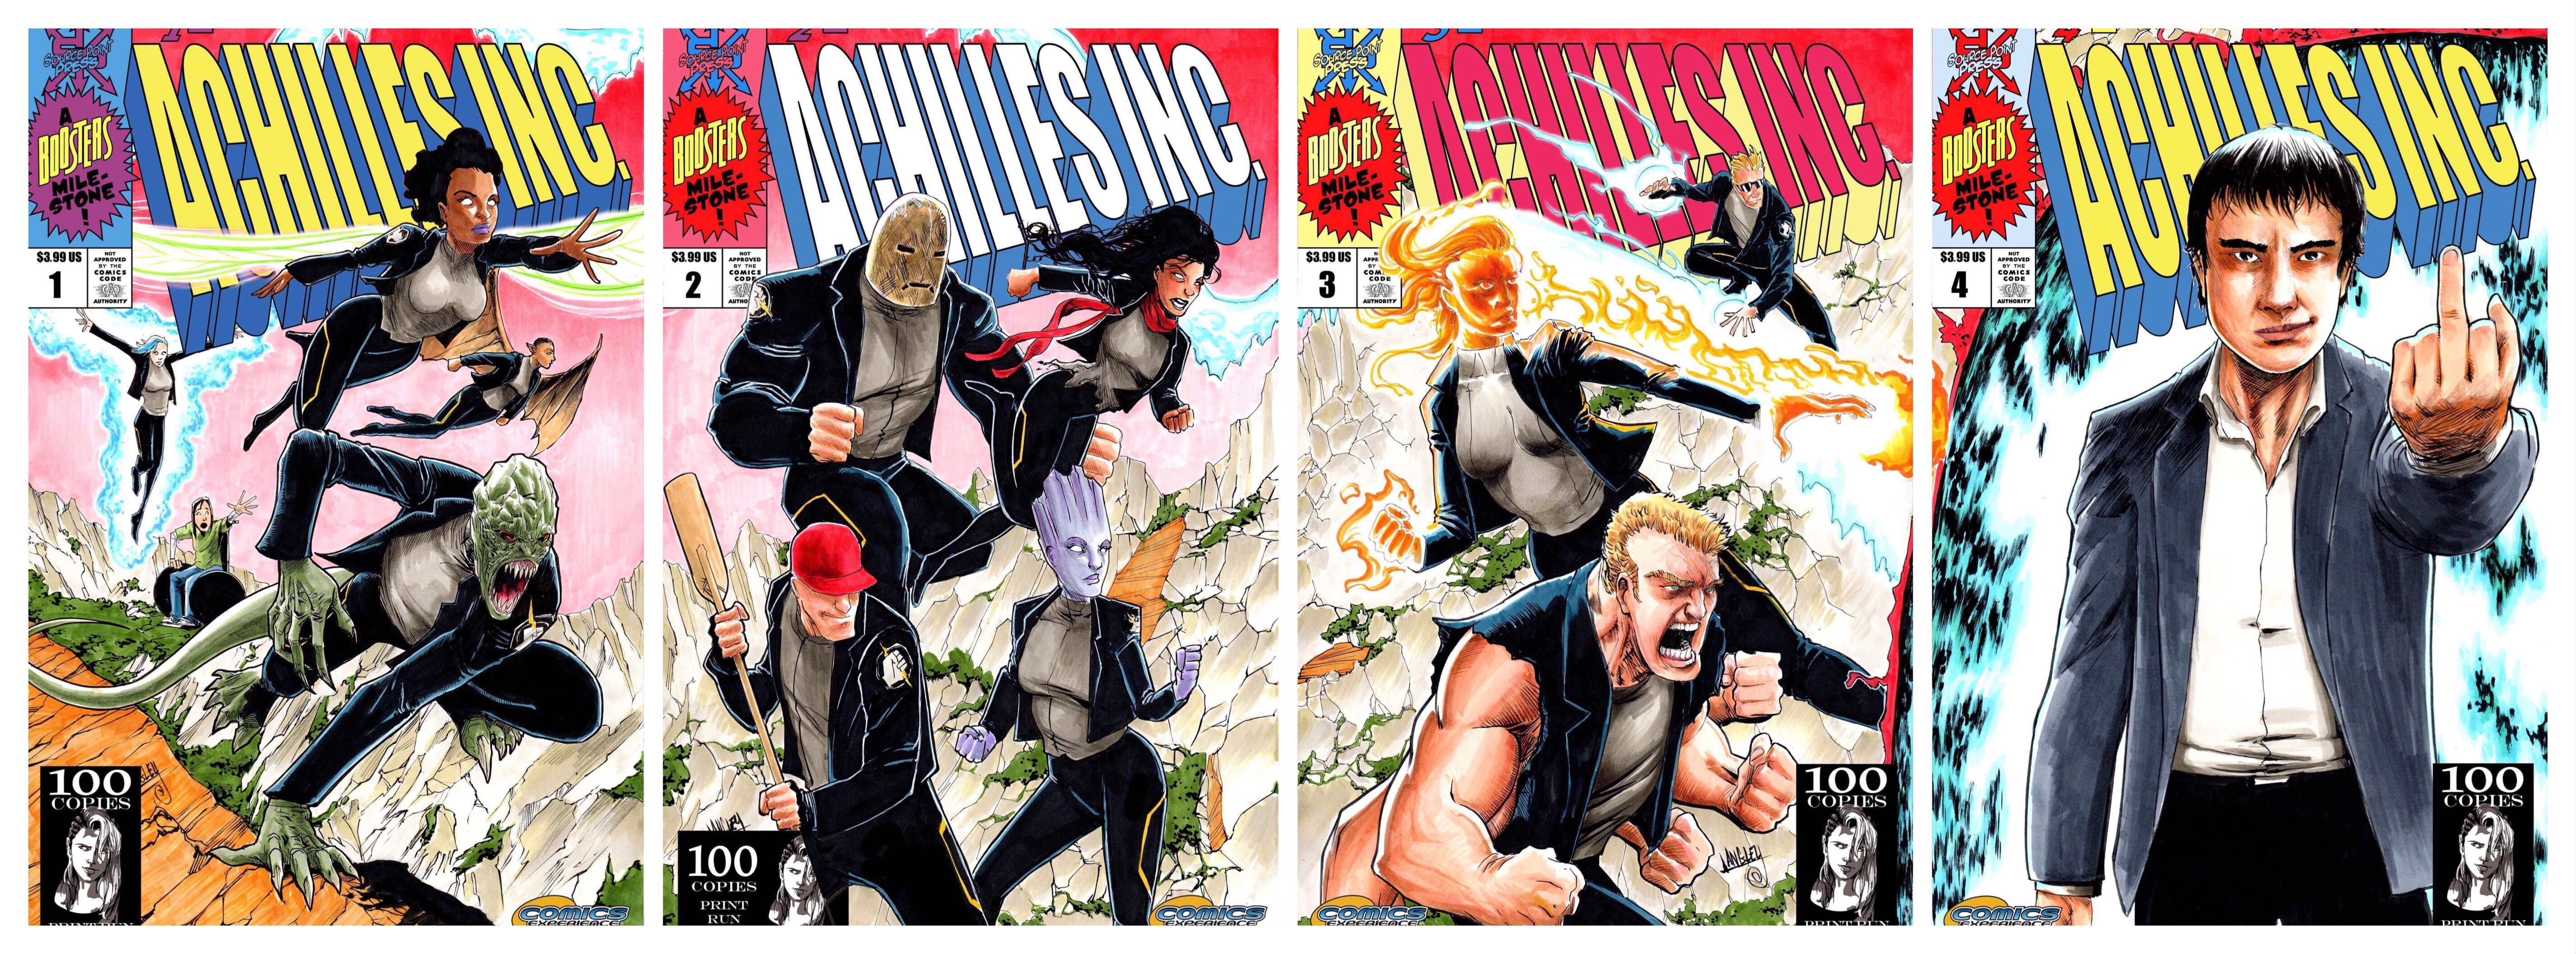 ACHILLES INC #1-#4 BTC EXCLUSIVE CONNECTING VARIANT COVER SET WITH RARE #4B VIRGIN GATEFOLD COVER